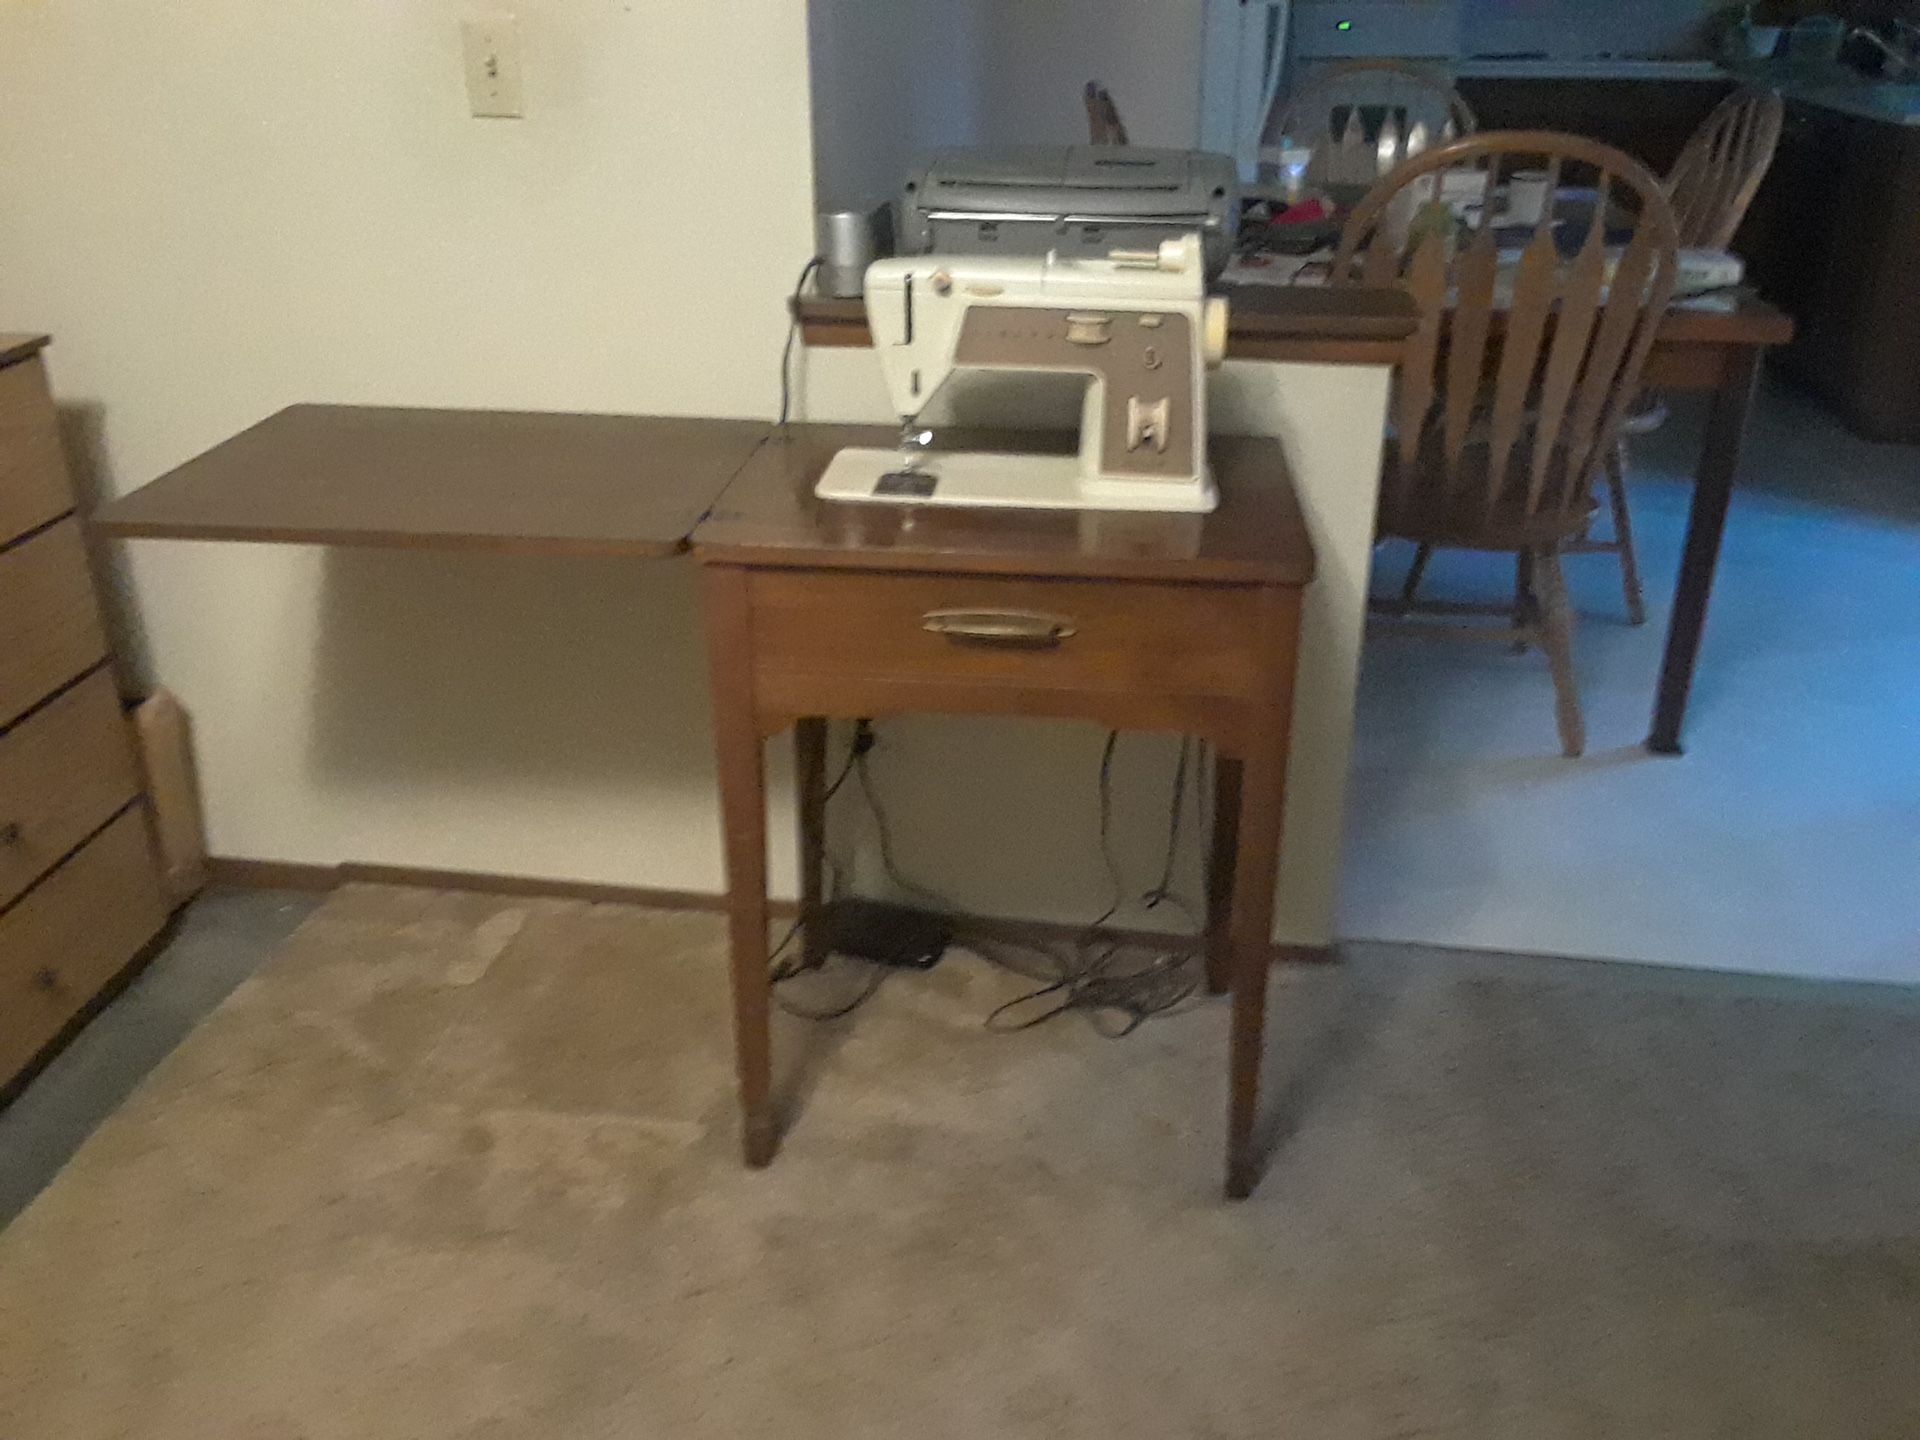 Sewing Machine with Table and set of scissors